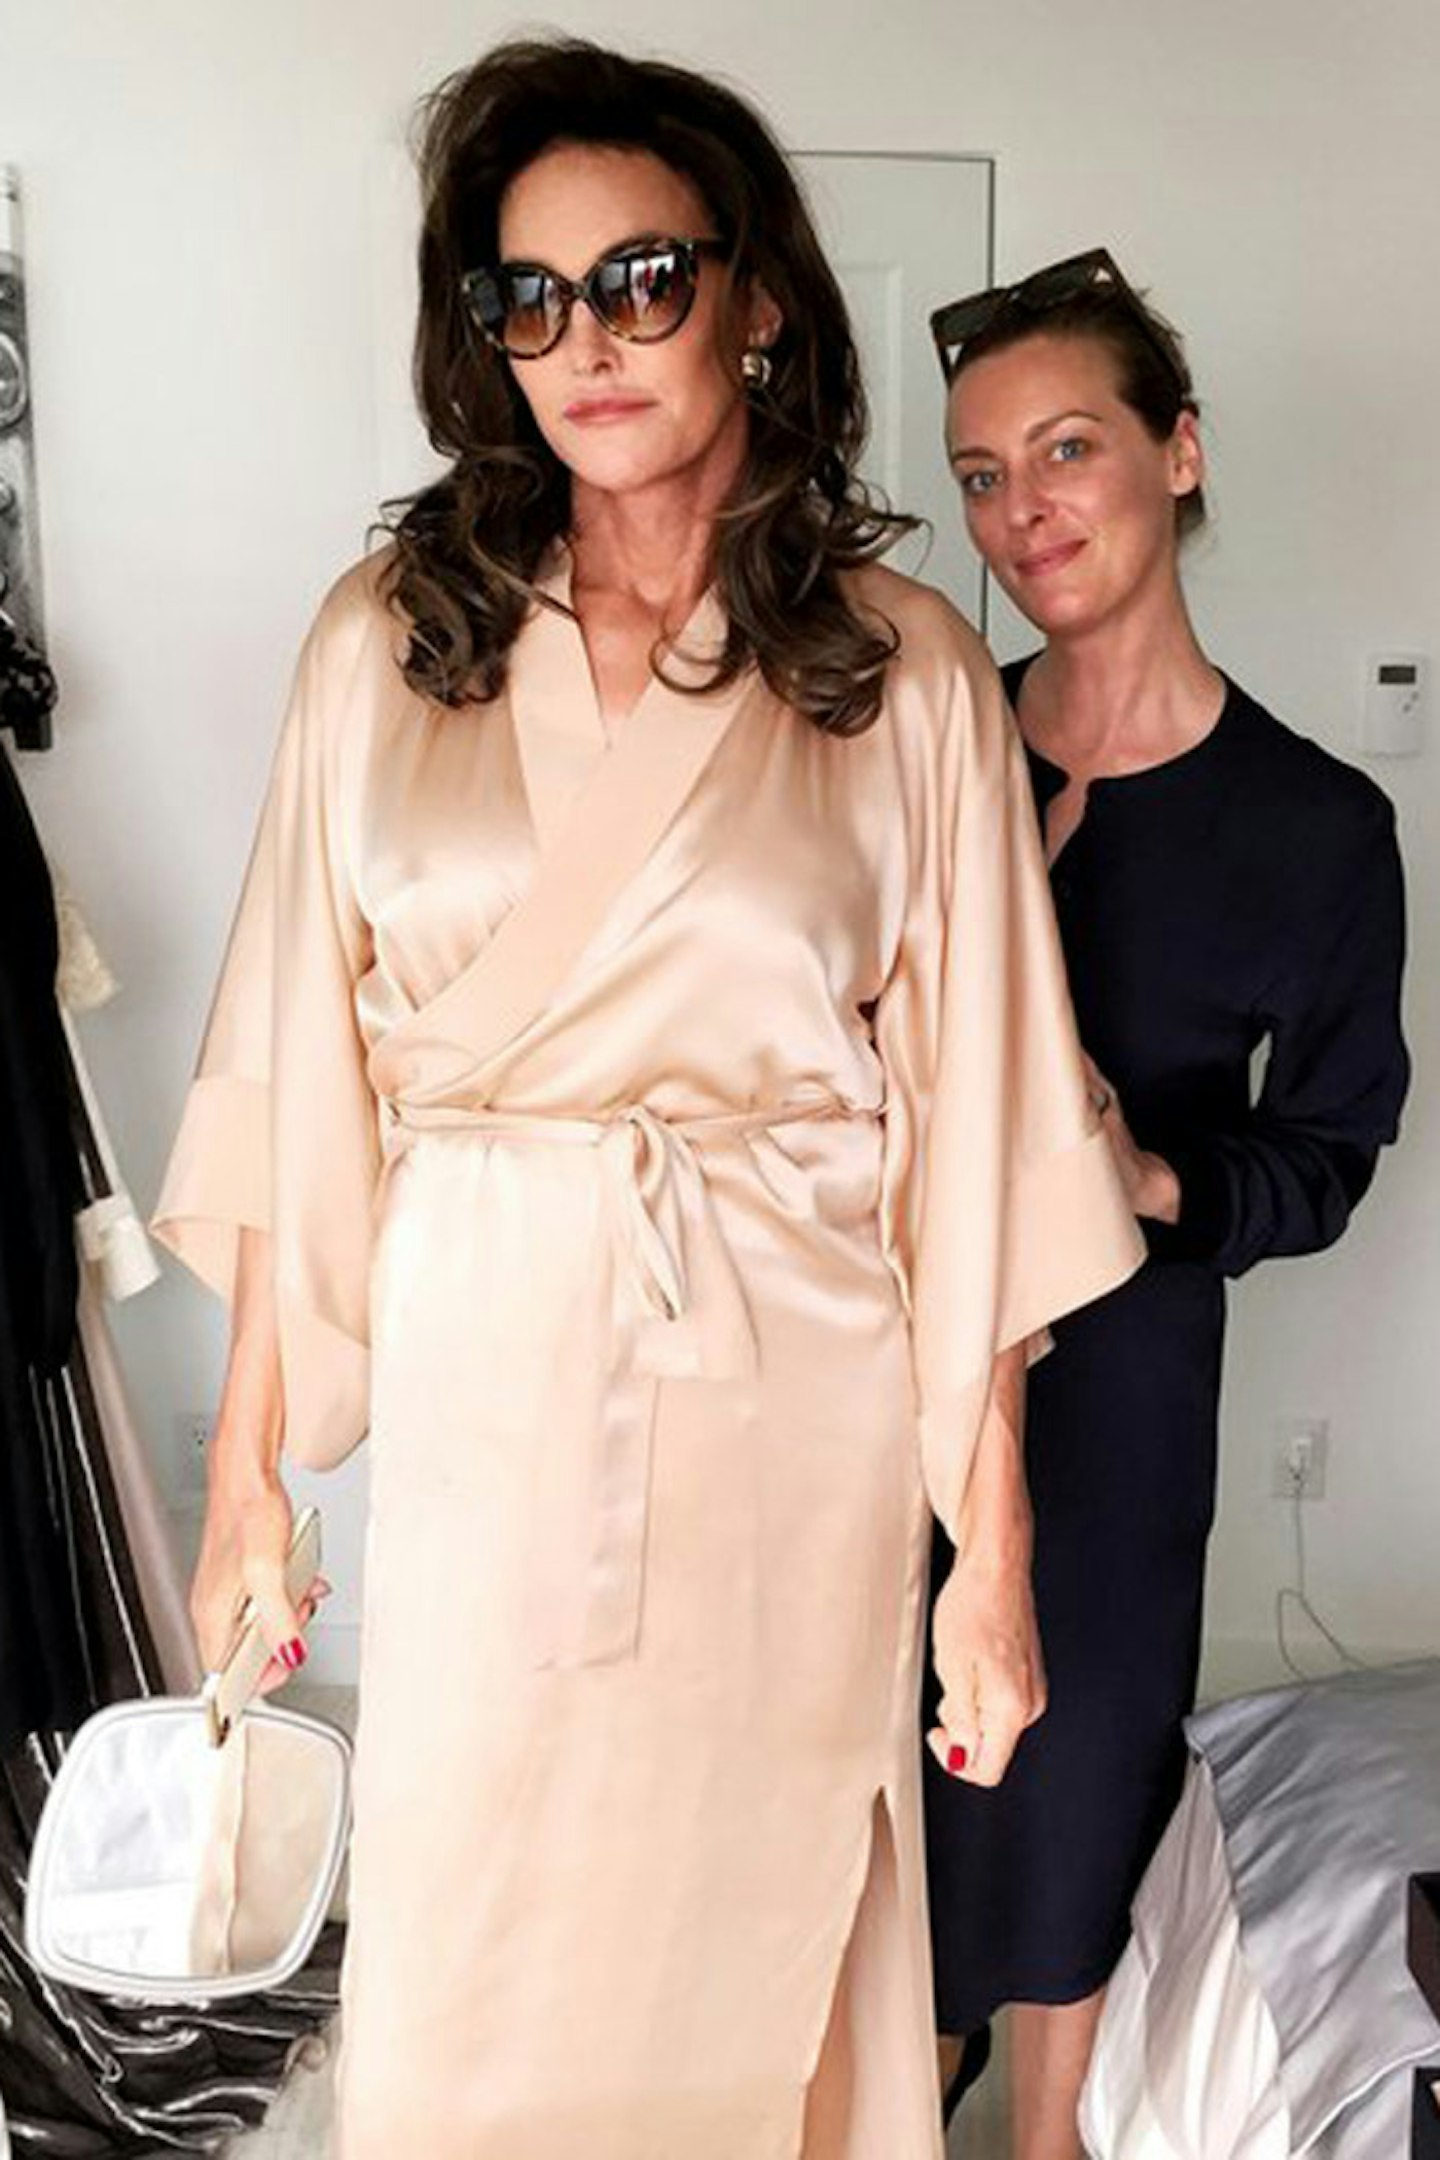 Why Vanity Fair's Caitlyn Jenner Cover Became Instantly Iconic